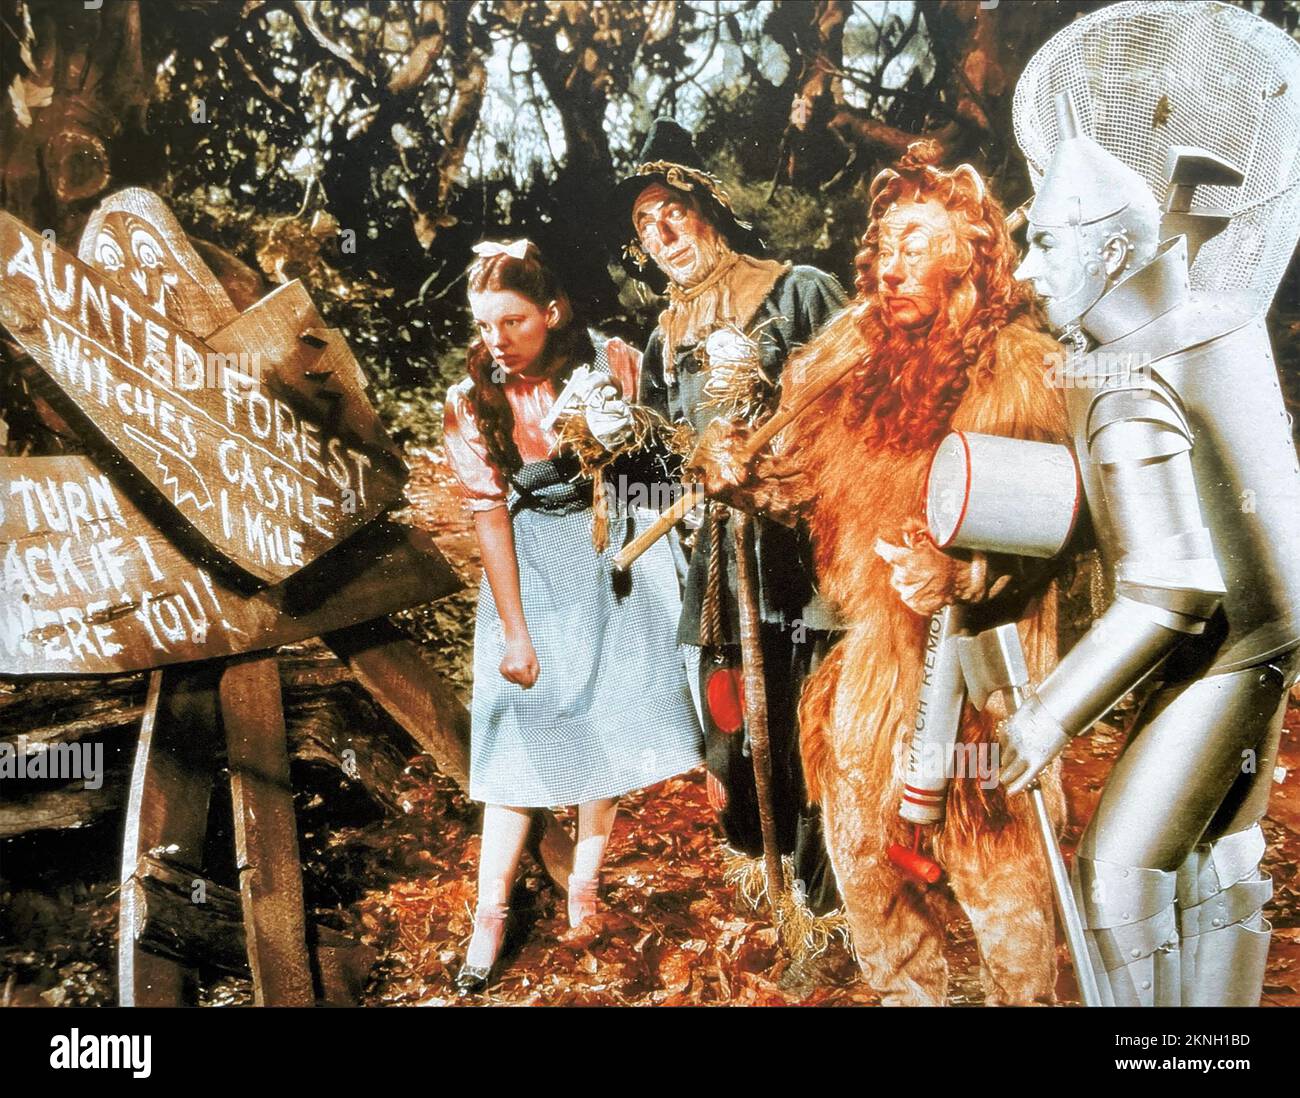 THE WIZARD OF OZ 1939 MGM film with Judy Garland Stock Photo